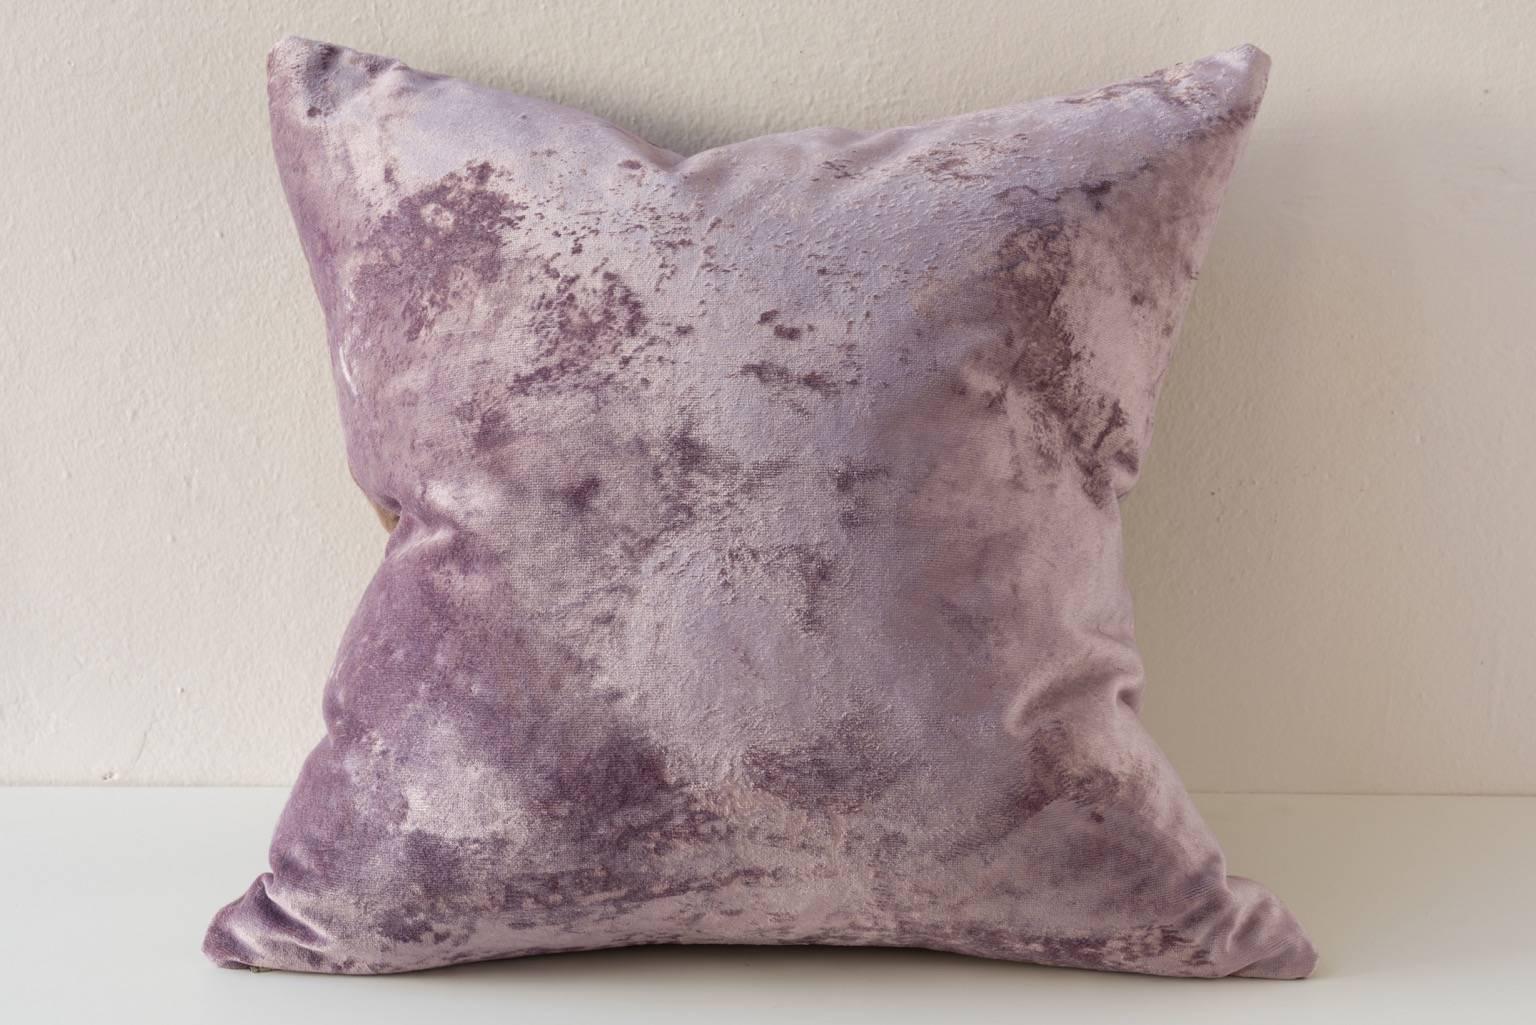 Crushed silk velvet pillows over dyed mauve-- a pair available. 

Linen on reverse see image.
75/25 goose feather and down inserts.
Concealed zippers.
Check our 1stdibs storefront for pillows in coordinating fabrics.